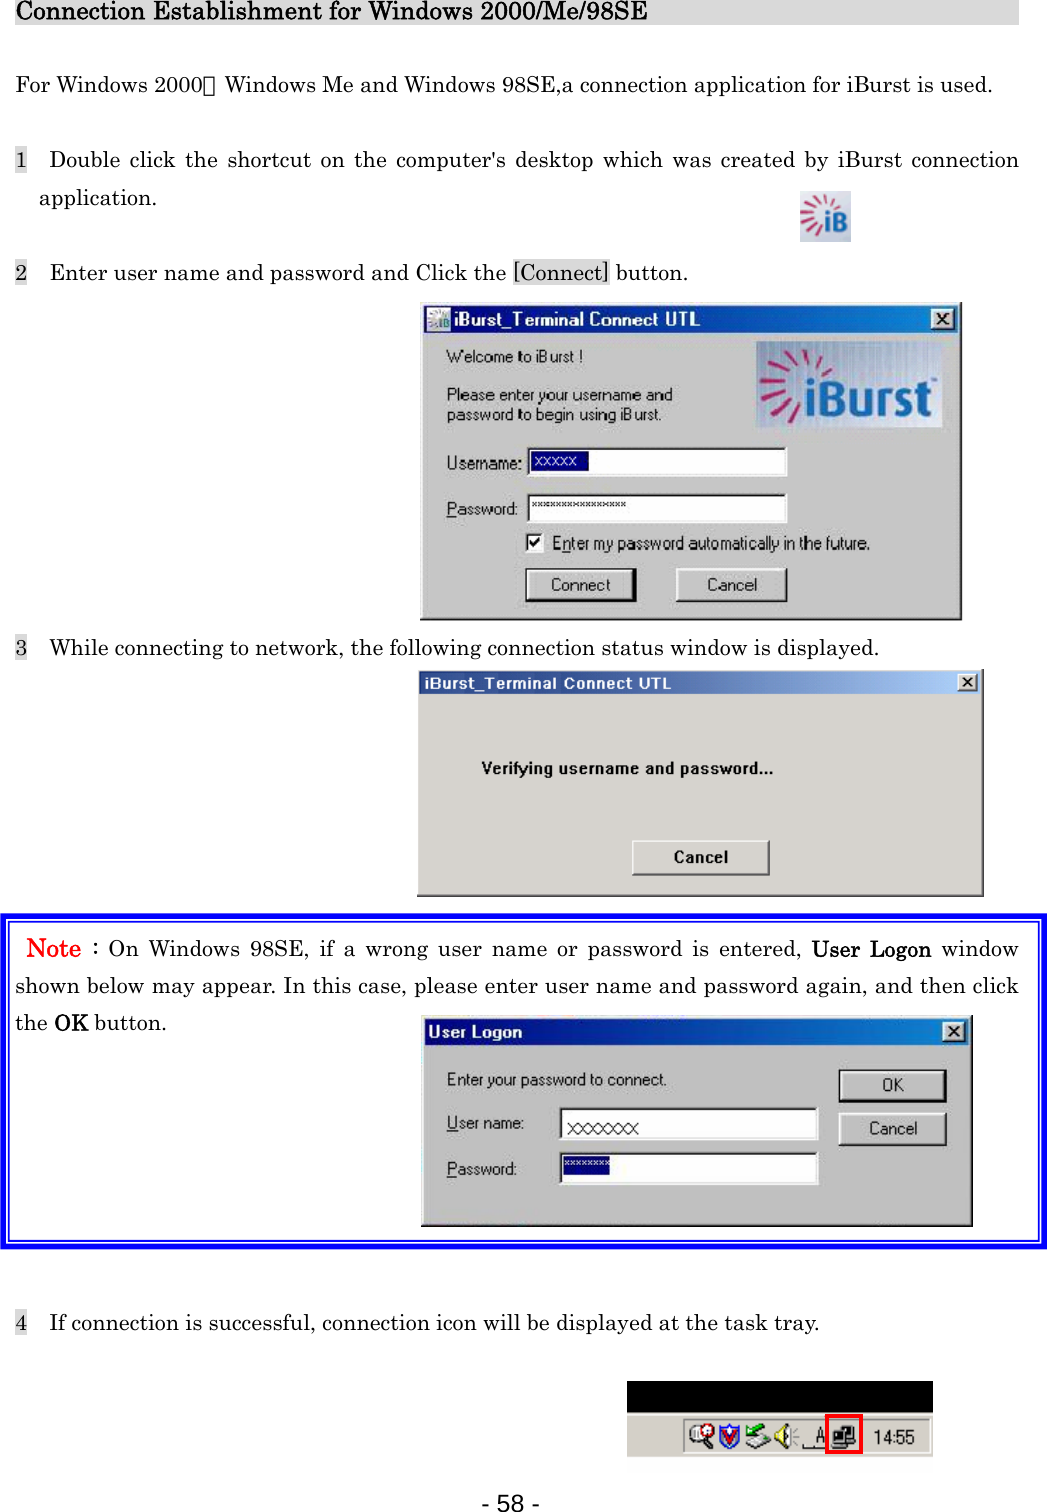 Connection Establishment for Windows 2000/Me/98SE                               For Windows 2000、Windows Me and Windows 98SE,a connection application for iBurst is used.  1  Double click the shortcut on the computer&apos;s desktop which was created by iBurst connection application.  2    Enter user name and password and Click the [Connect] button.            3    While connecting to network, the following connection status window is displayed.         Note :  On Windows 98SE, if a wrong user name or password is entered, User Logon window shown below may appear. In this case, please enter user name and password again, and then click the OK button.        4    If connection is successful, connection icon will be displayed at the task tray.    - 58 -  